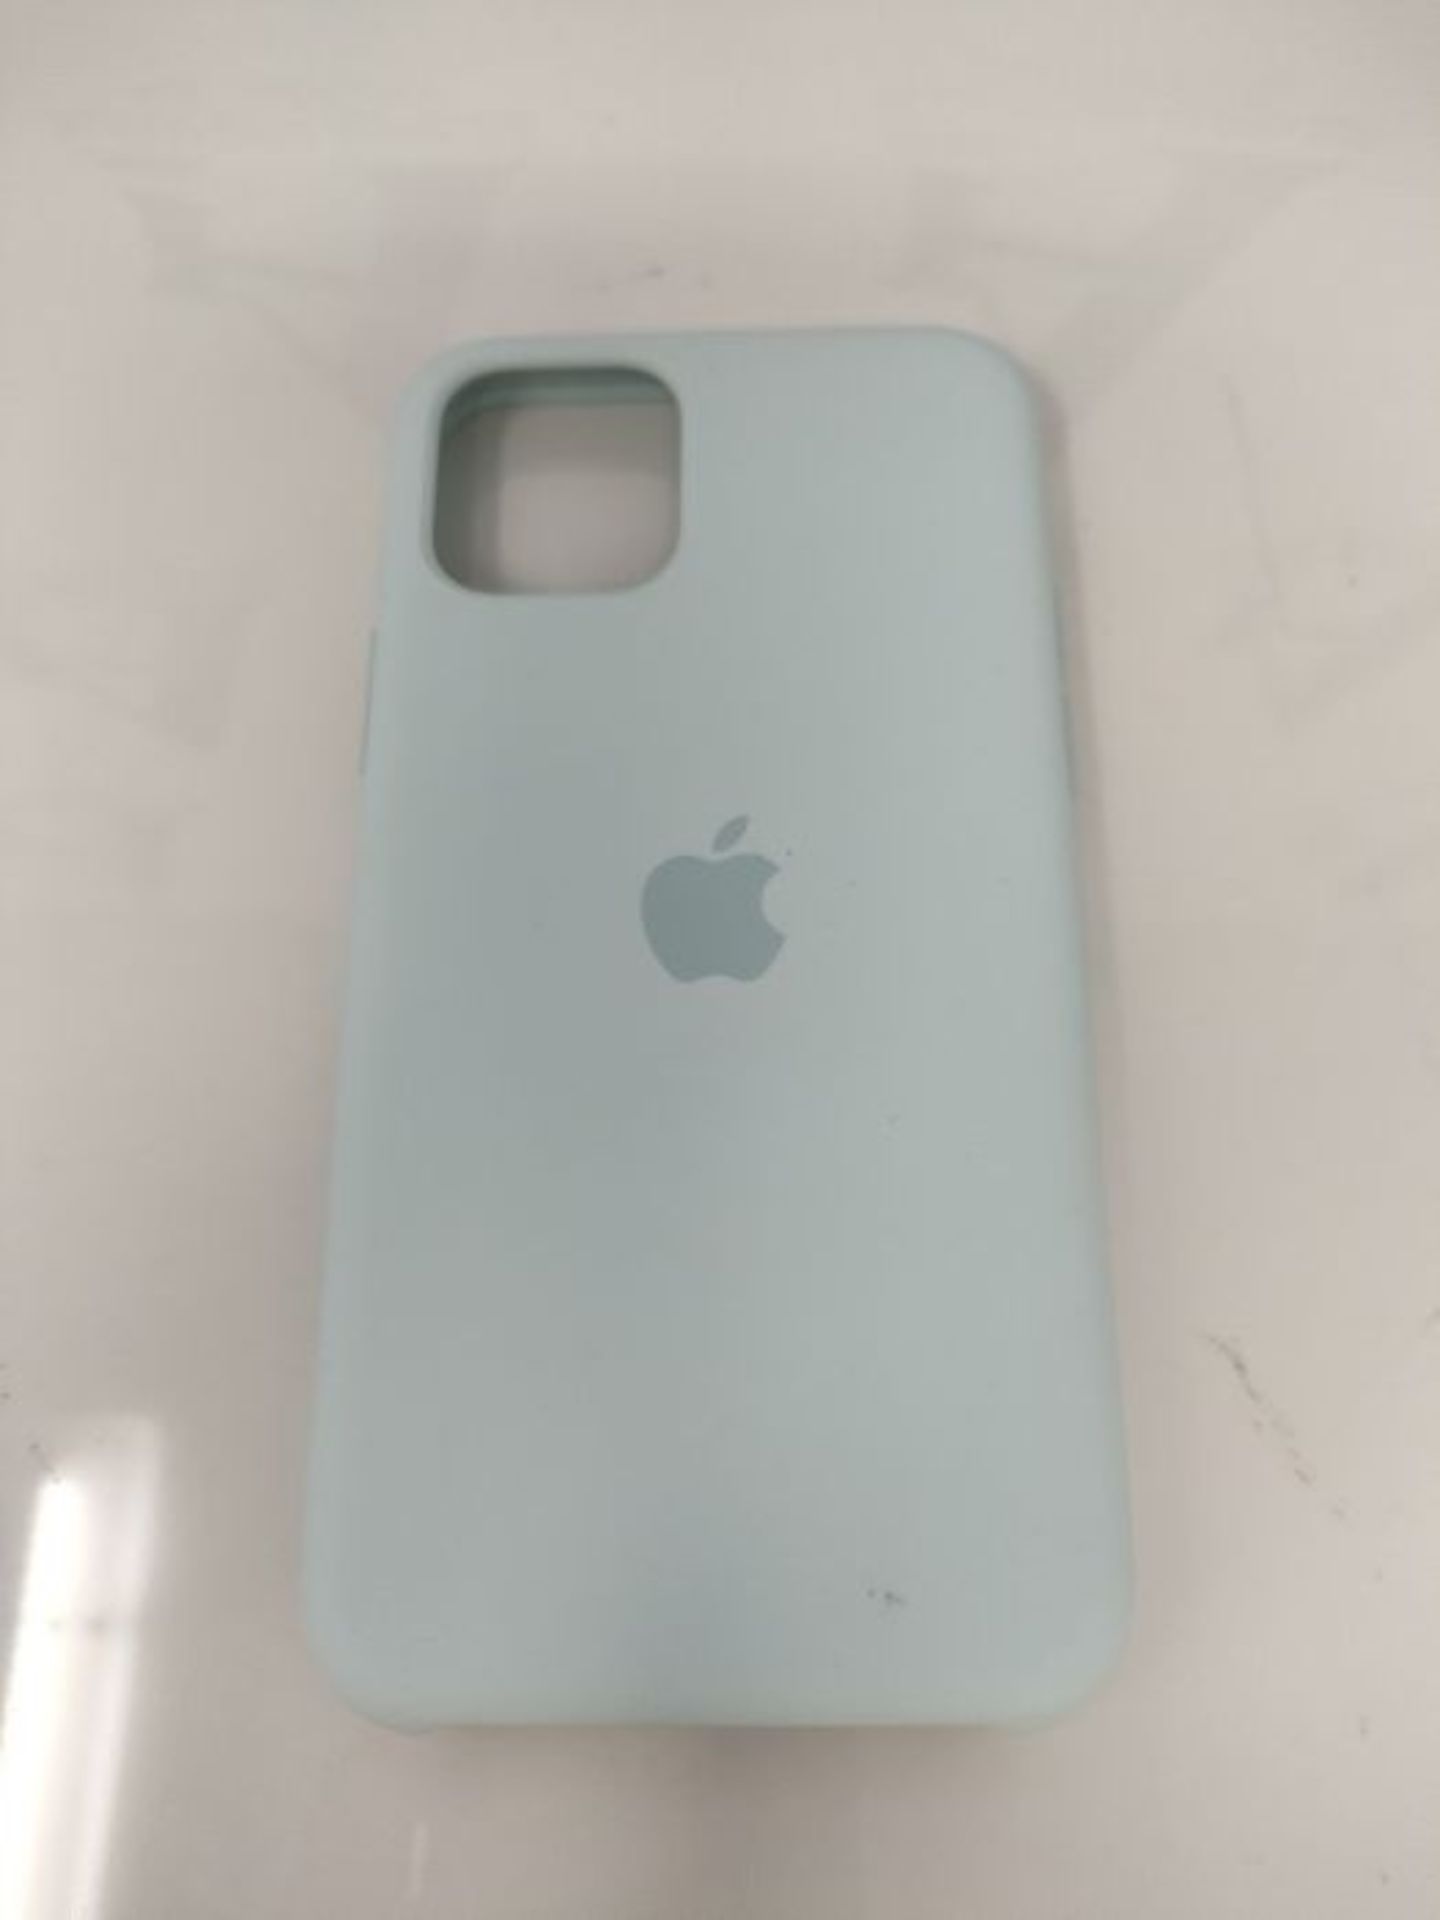 Apple Silicone Case (for iPhone 11 Pro) - Mint - Image 2 of 2